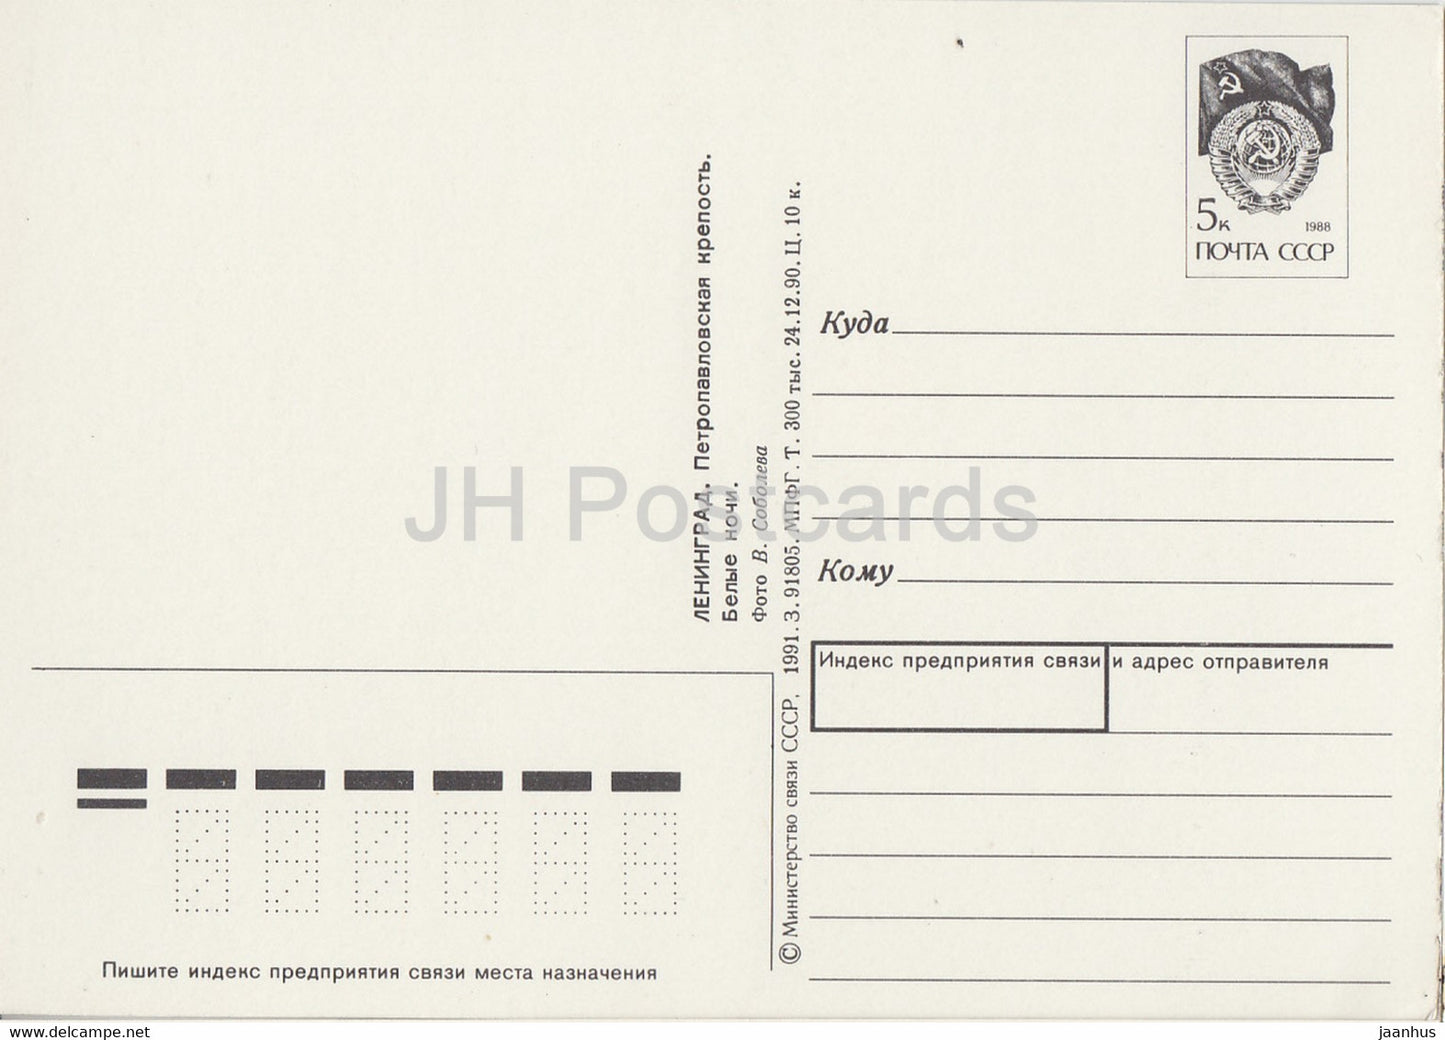 Leningrad - St Petersburg - Peter and Paul Fortress - White nights - postal stationery - 1 - 1991 - Russia USSR - unused